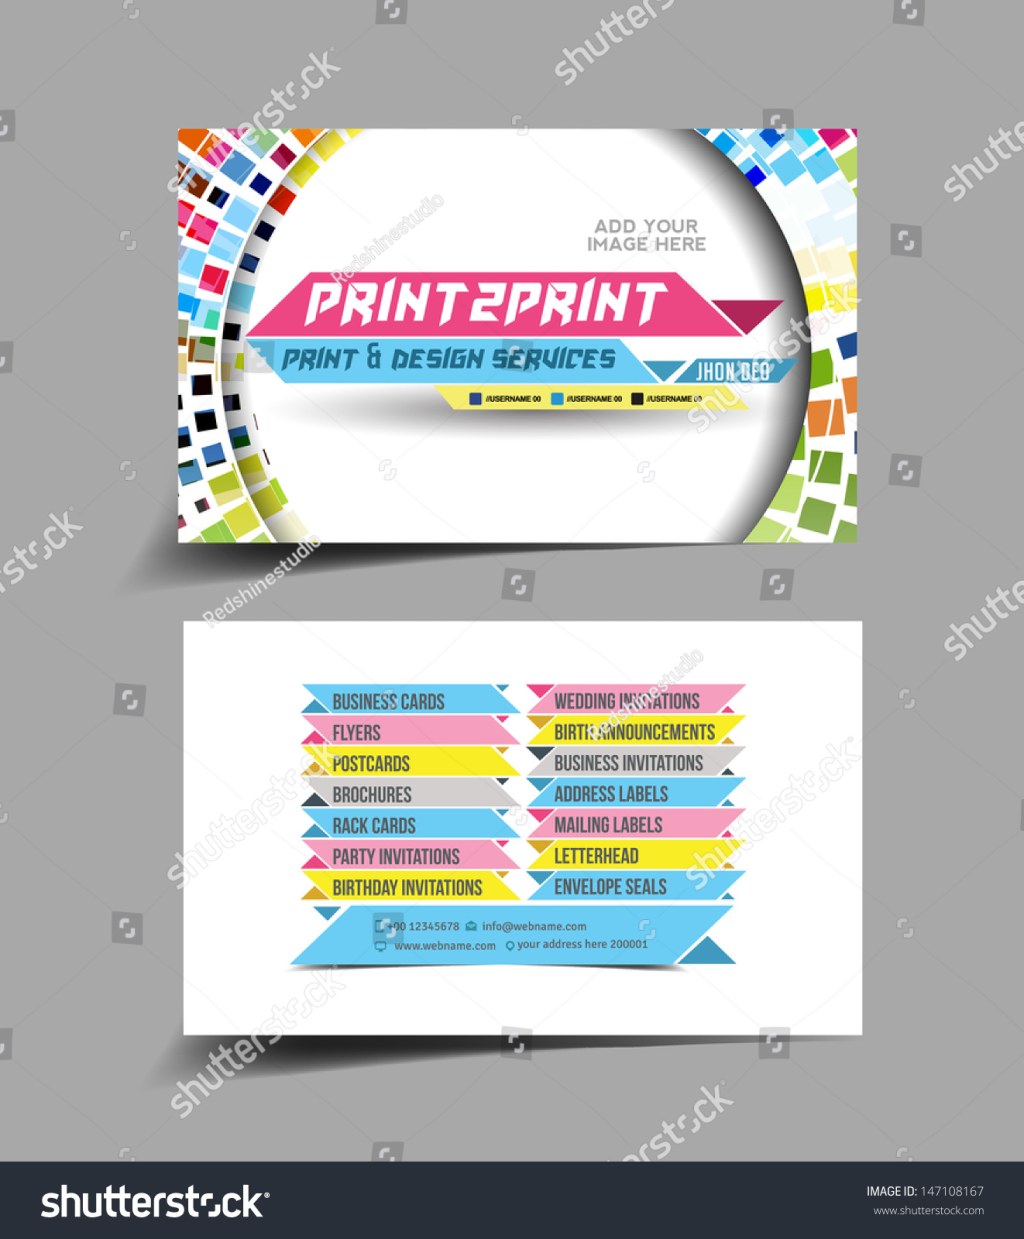 printing designing business cards - , Printing Press Business Cards Images, Stock Photos & Vectors